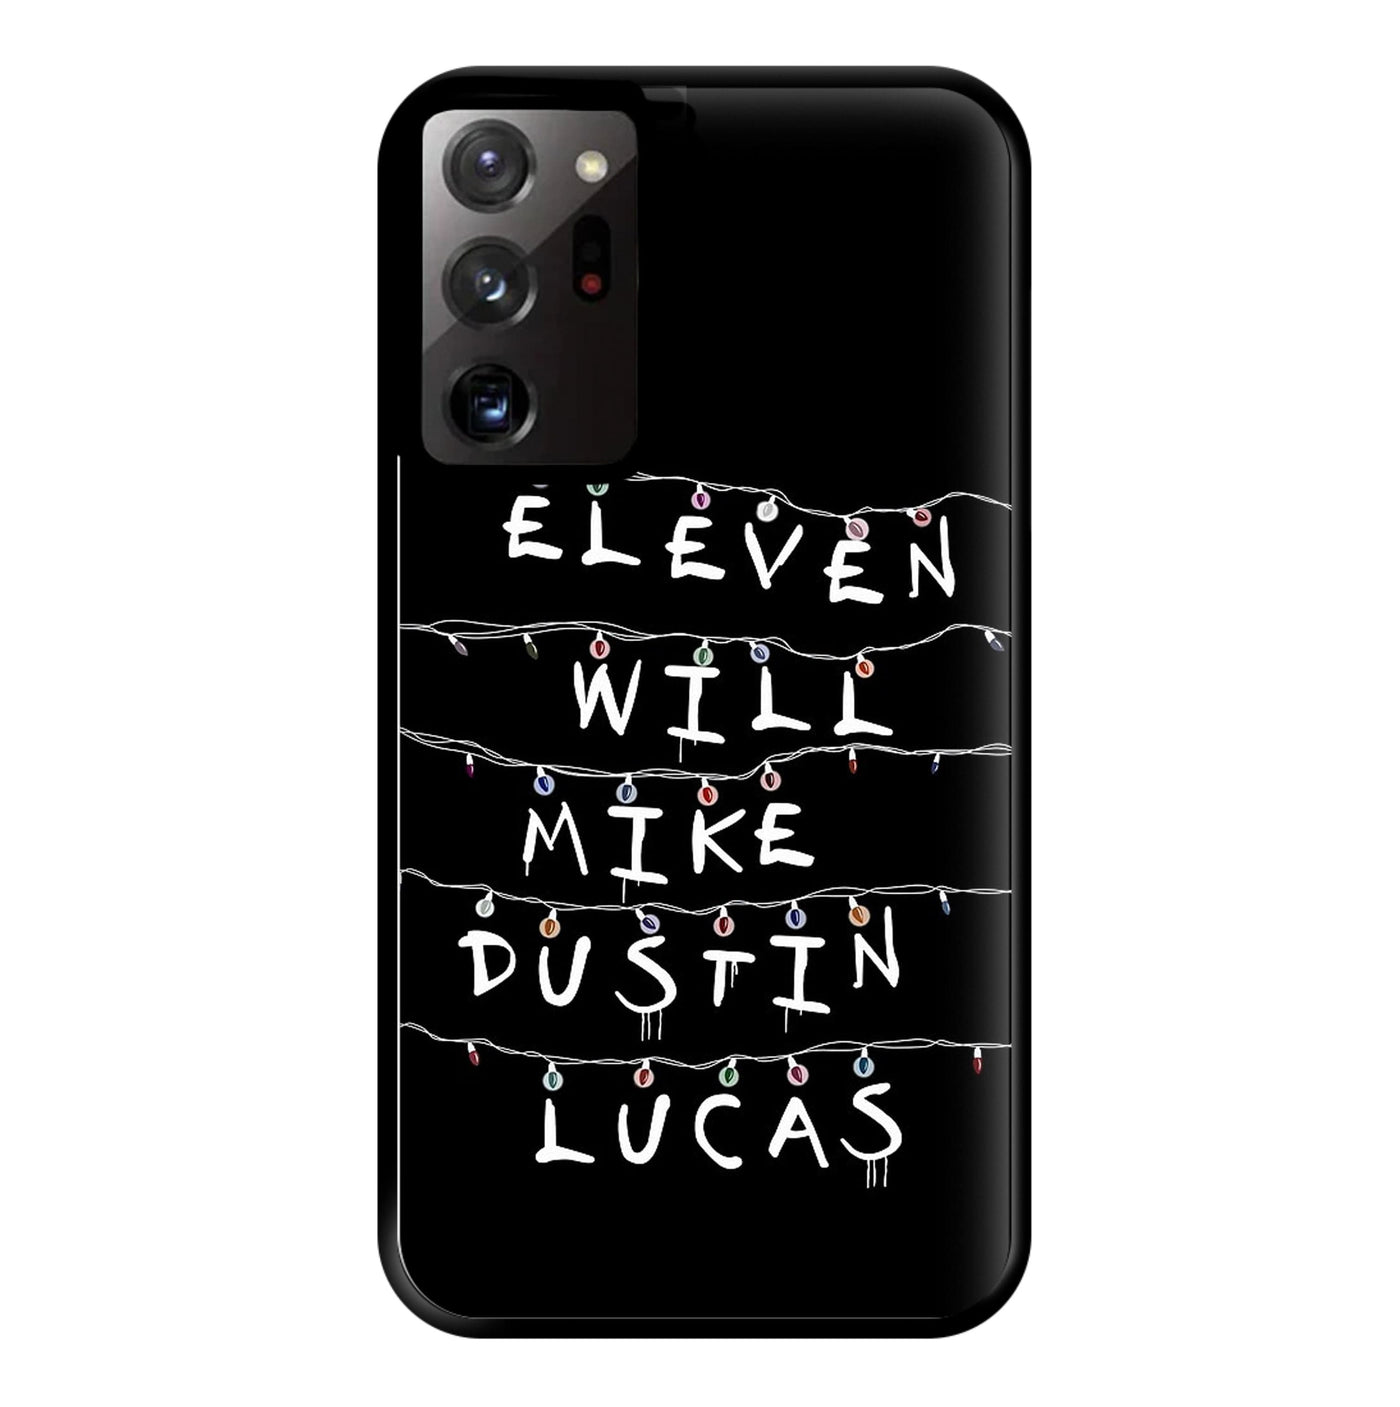 Eleven, Will, Mike, Dustin & Lucas - Stranger Things Phone Case